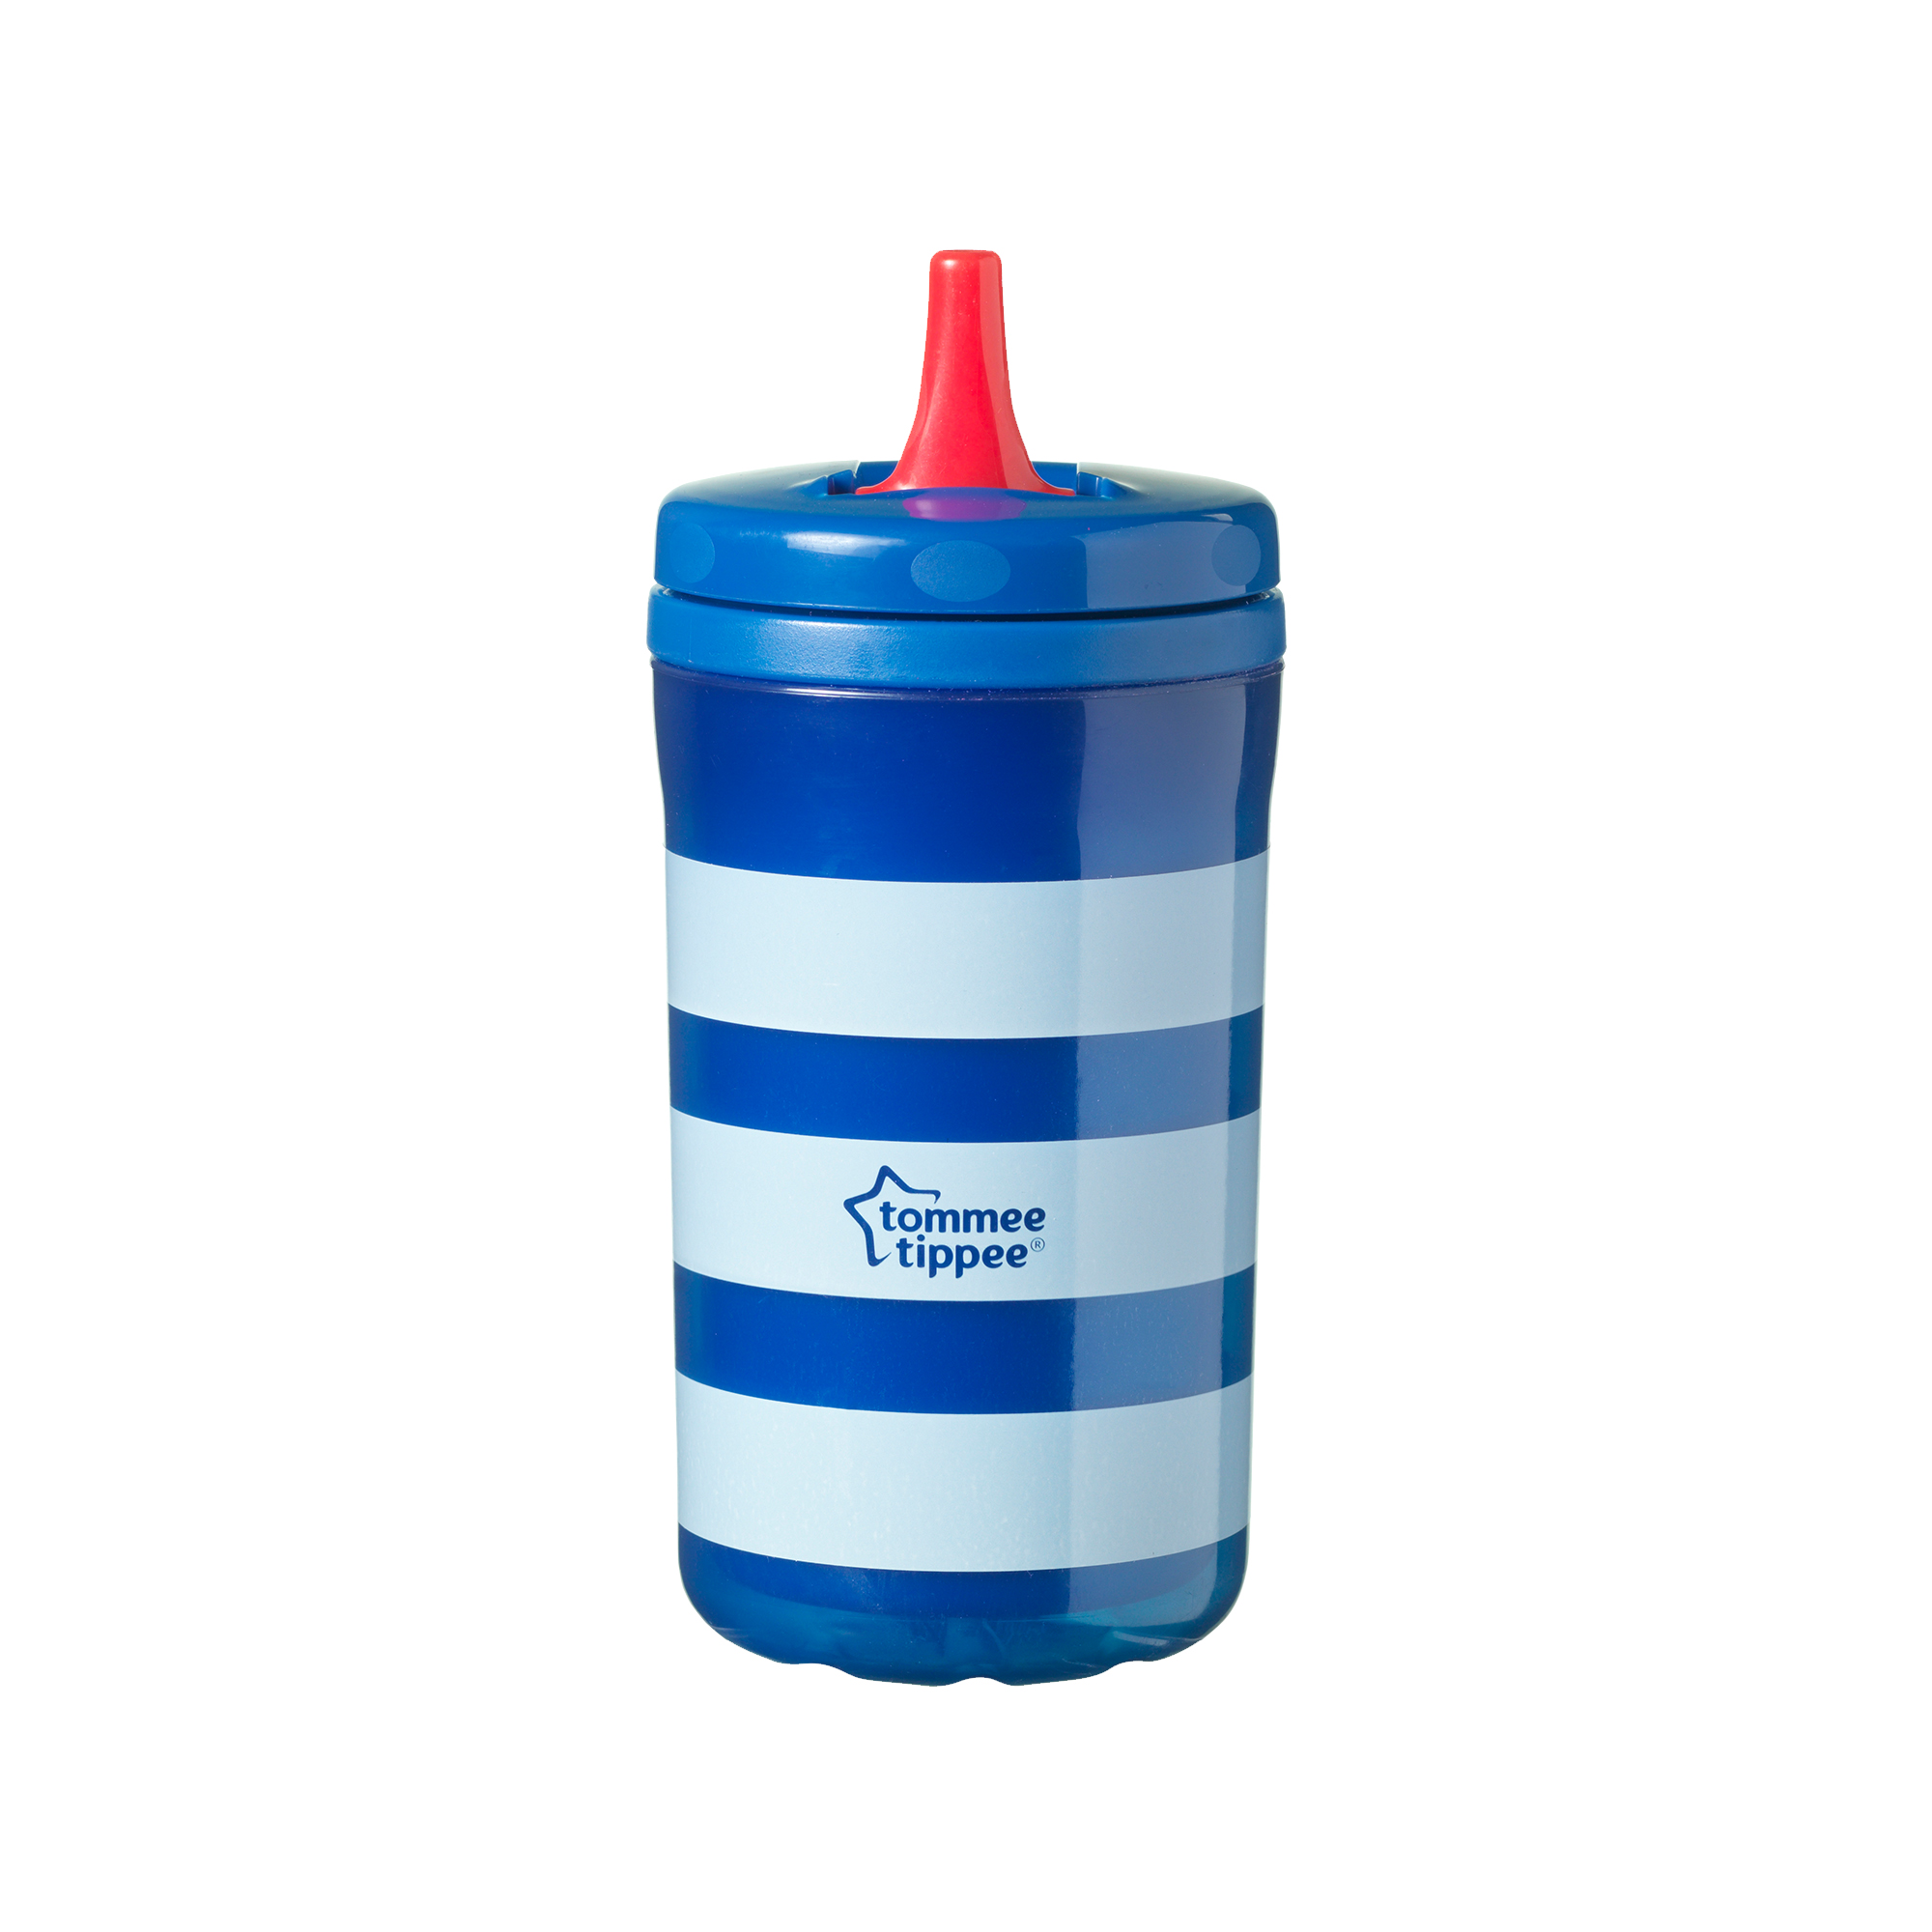 Cana Cool Cup, Tommee Tippee, 18luni+, 380ml, Albastru image 2